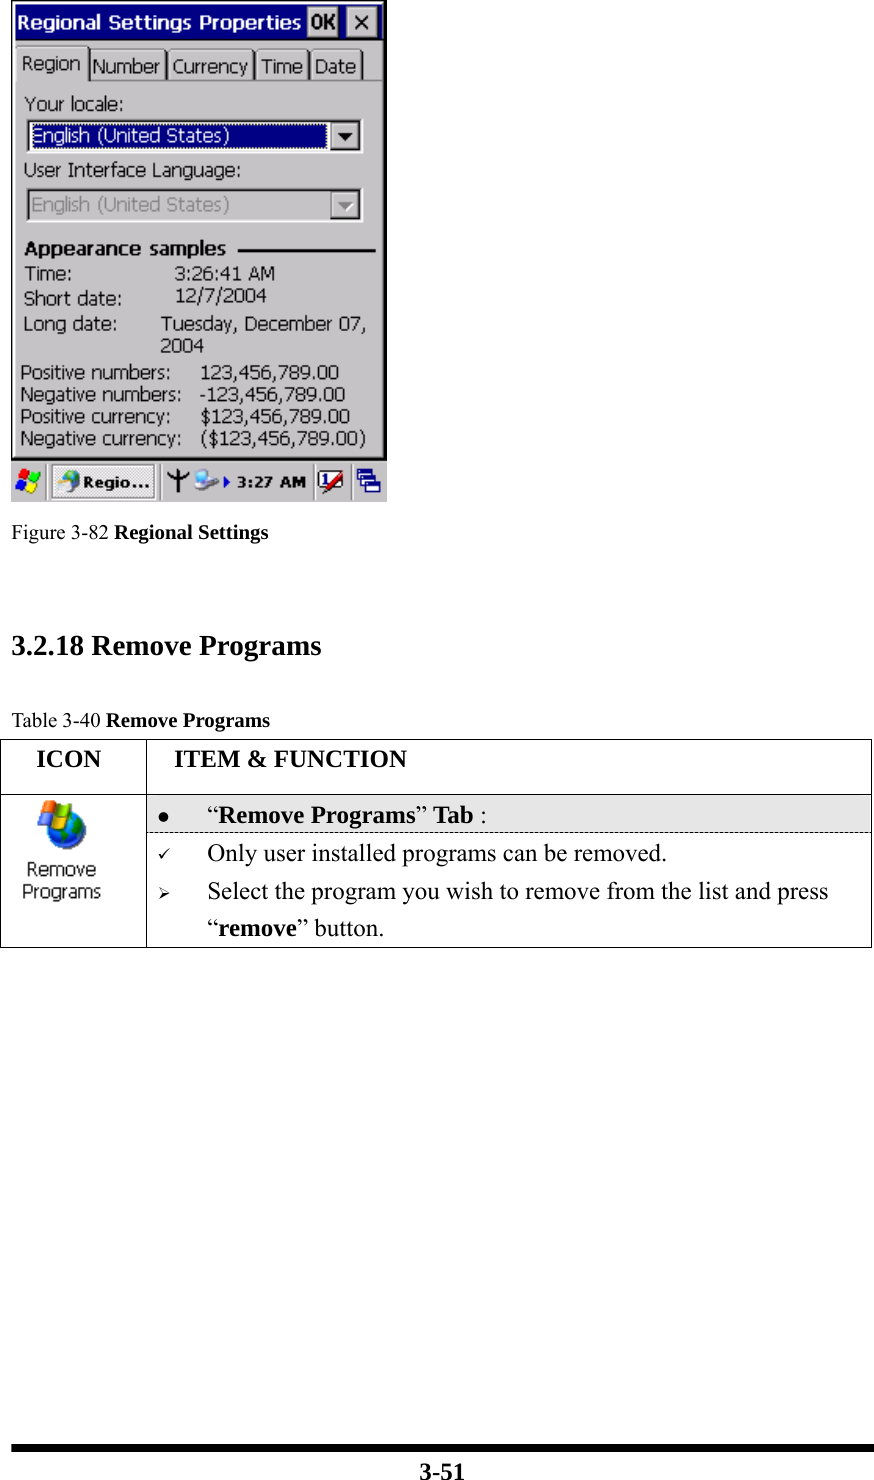  3-51   Figure 3-82 Regional Settings   3.2.18 Remove Programs  Table 3-40 Remove Programs   ICON   ITEM &amp; FUNCTION z “Remove Programs” Tab :    9 Only user installed programs can be removed. ¾ Select the program you wish to remove from the list and press “remove” button.             